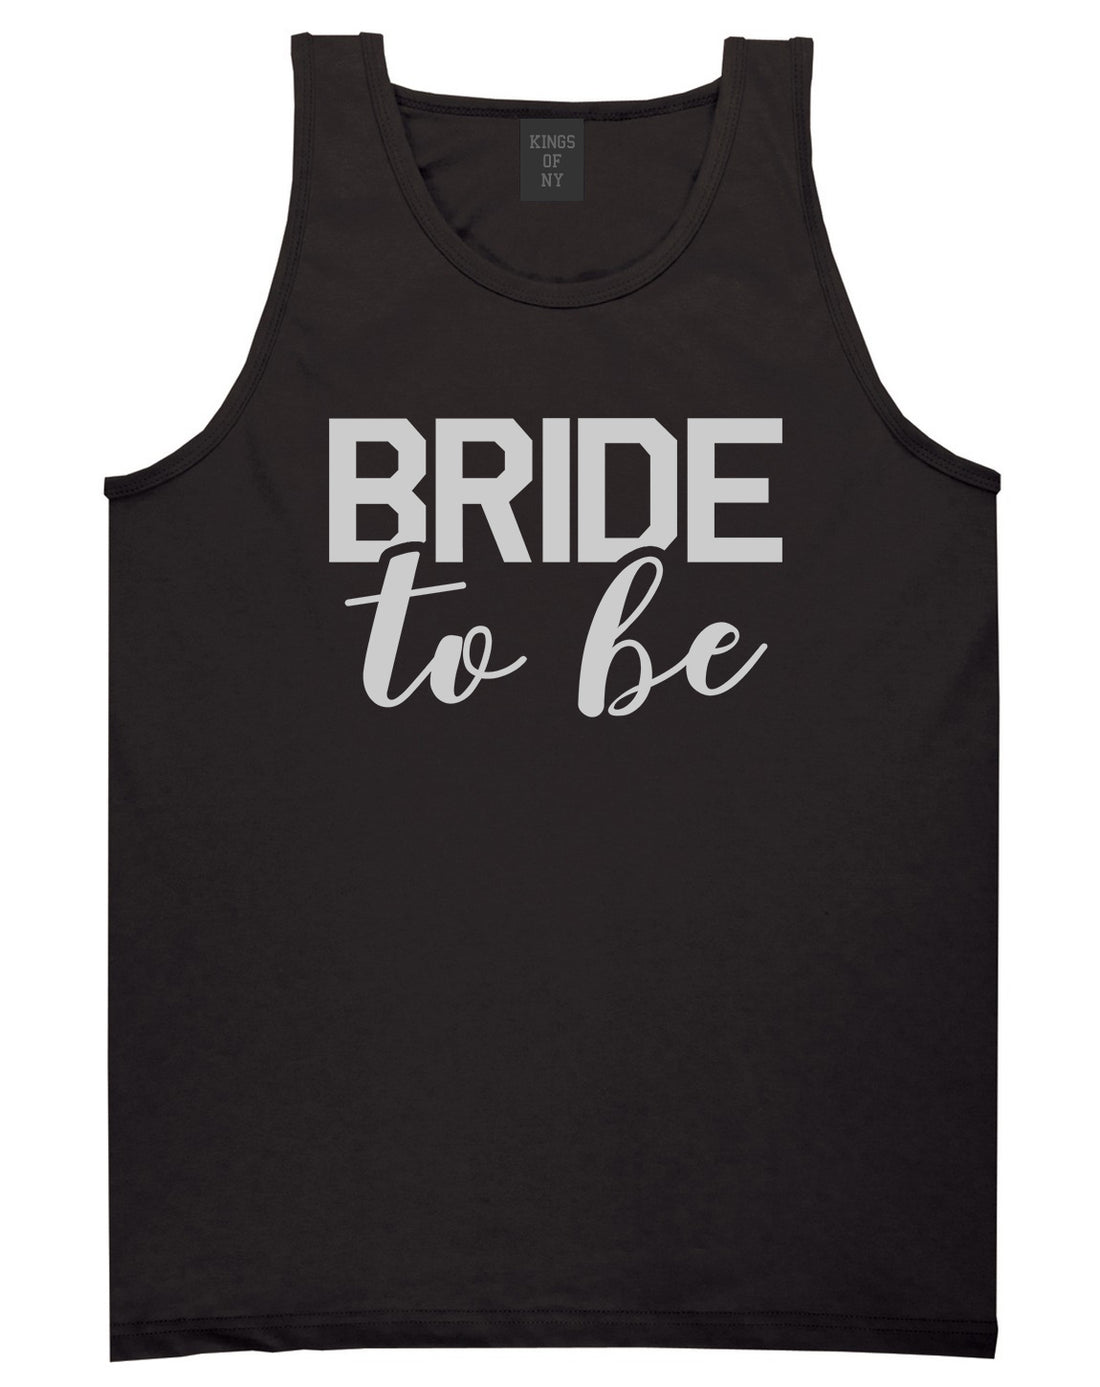 Bride To Be Black Tank Top Shirt by Kings Of NY